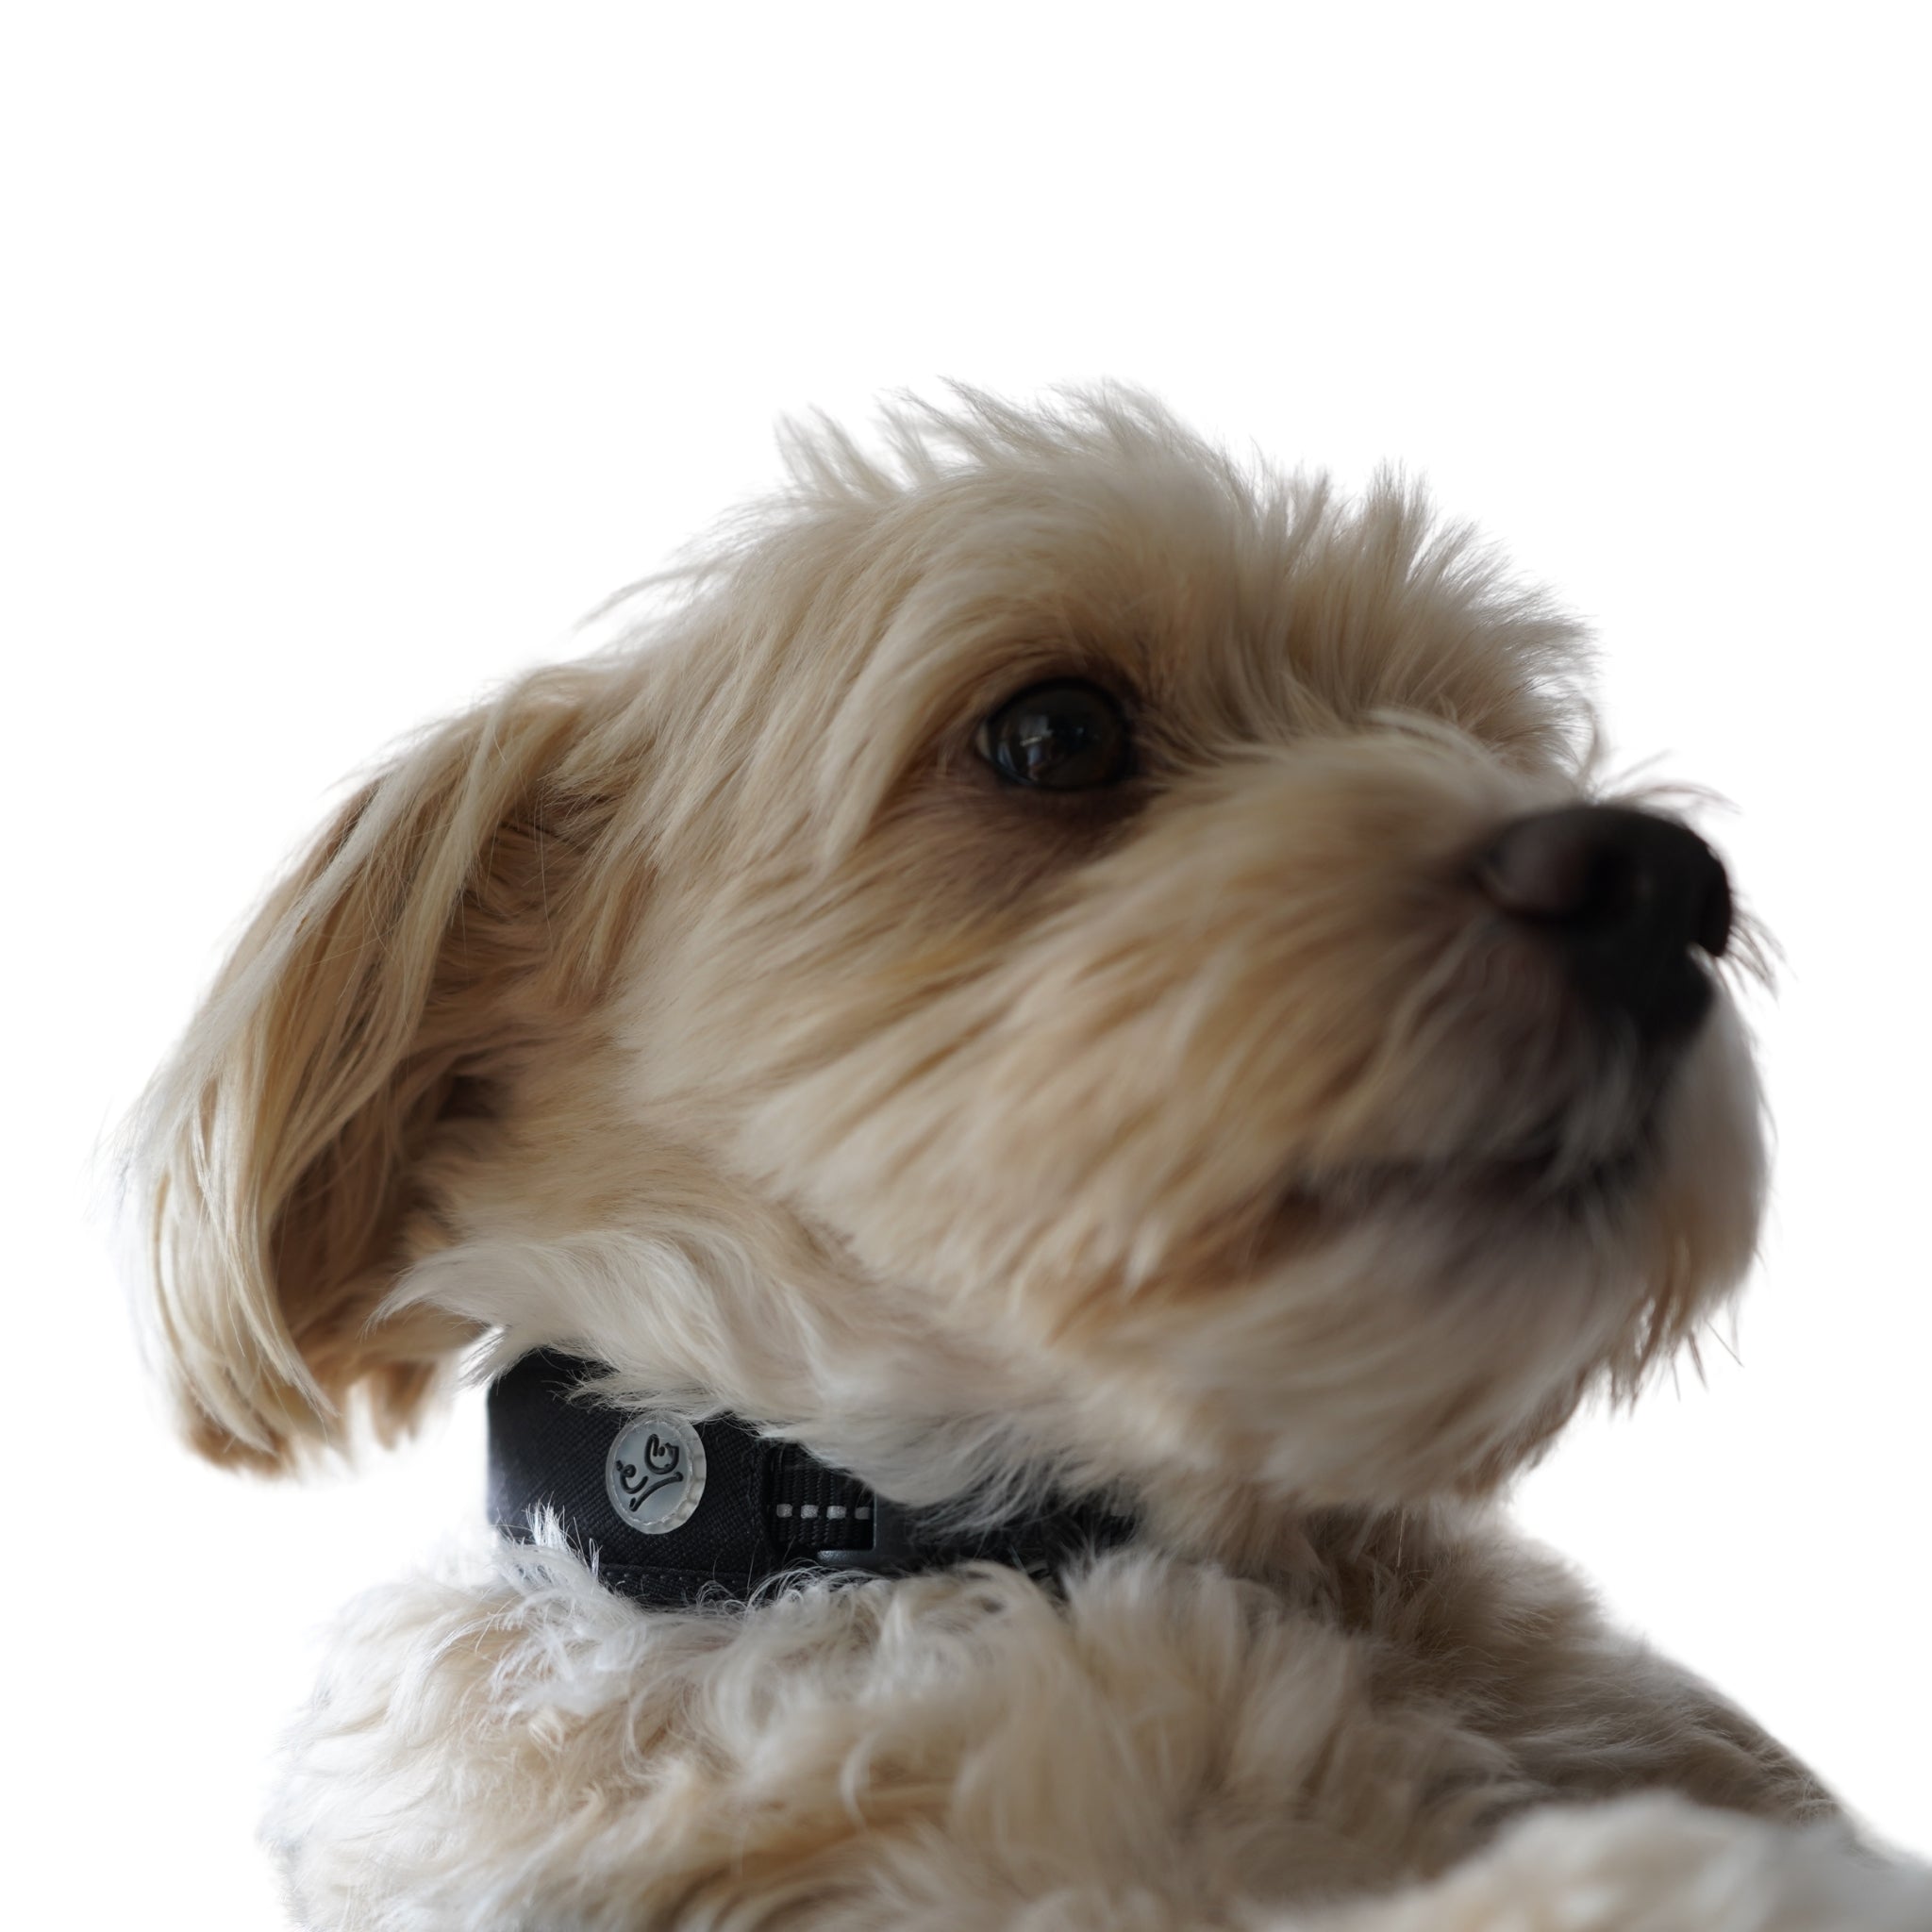 A dog wearing a Black Air Mesh collar displaying the Waggy logo